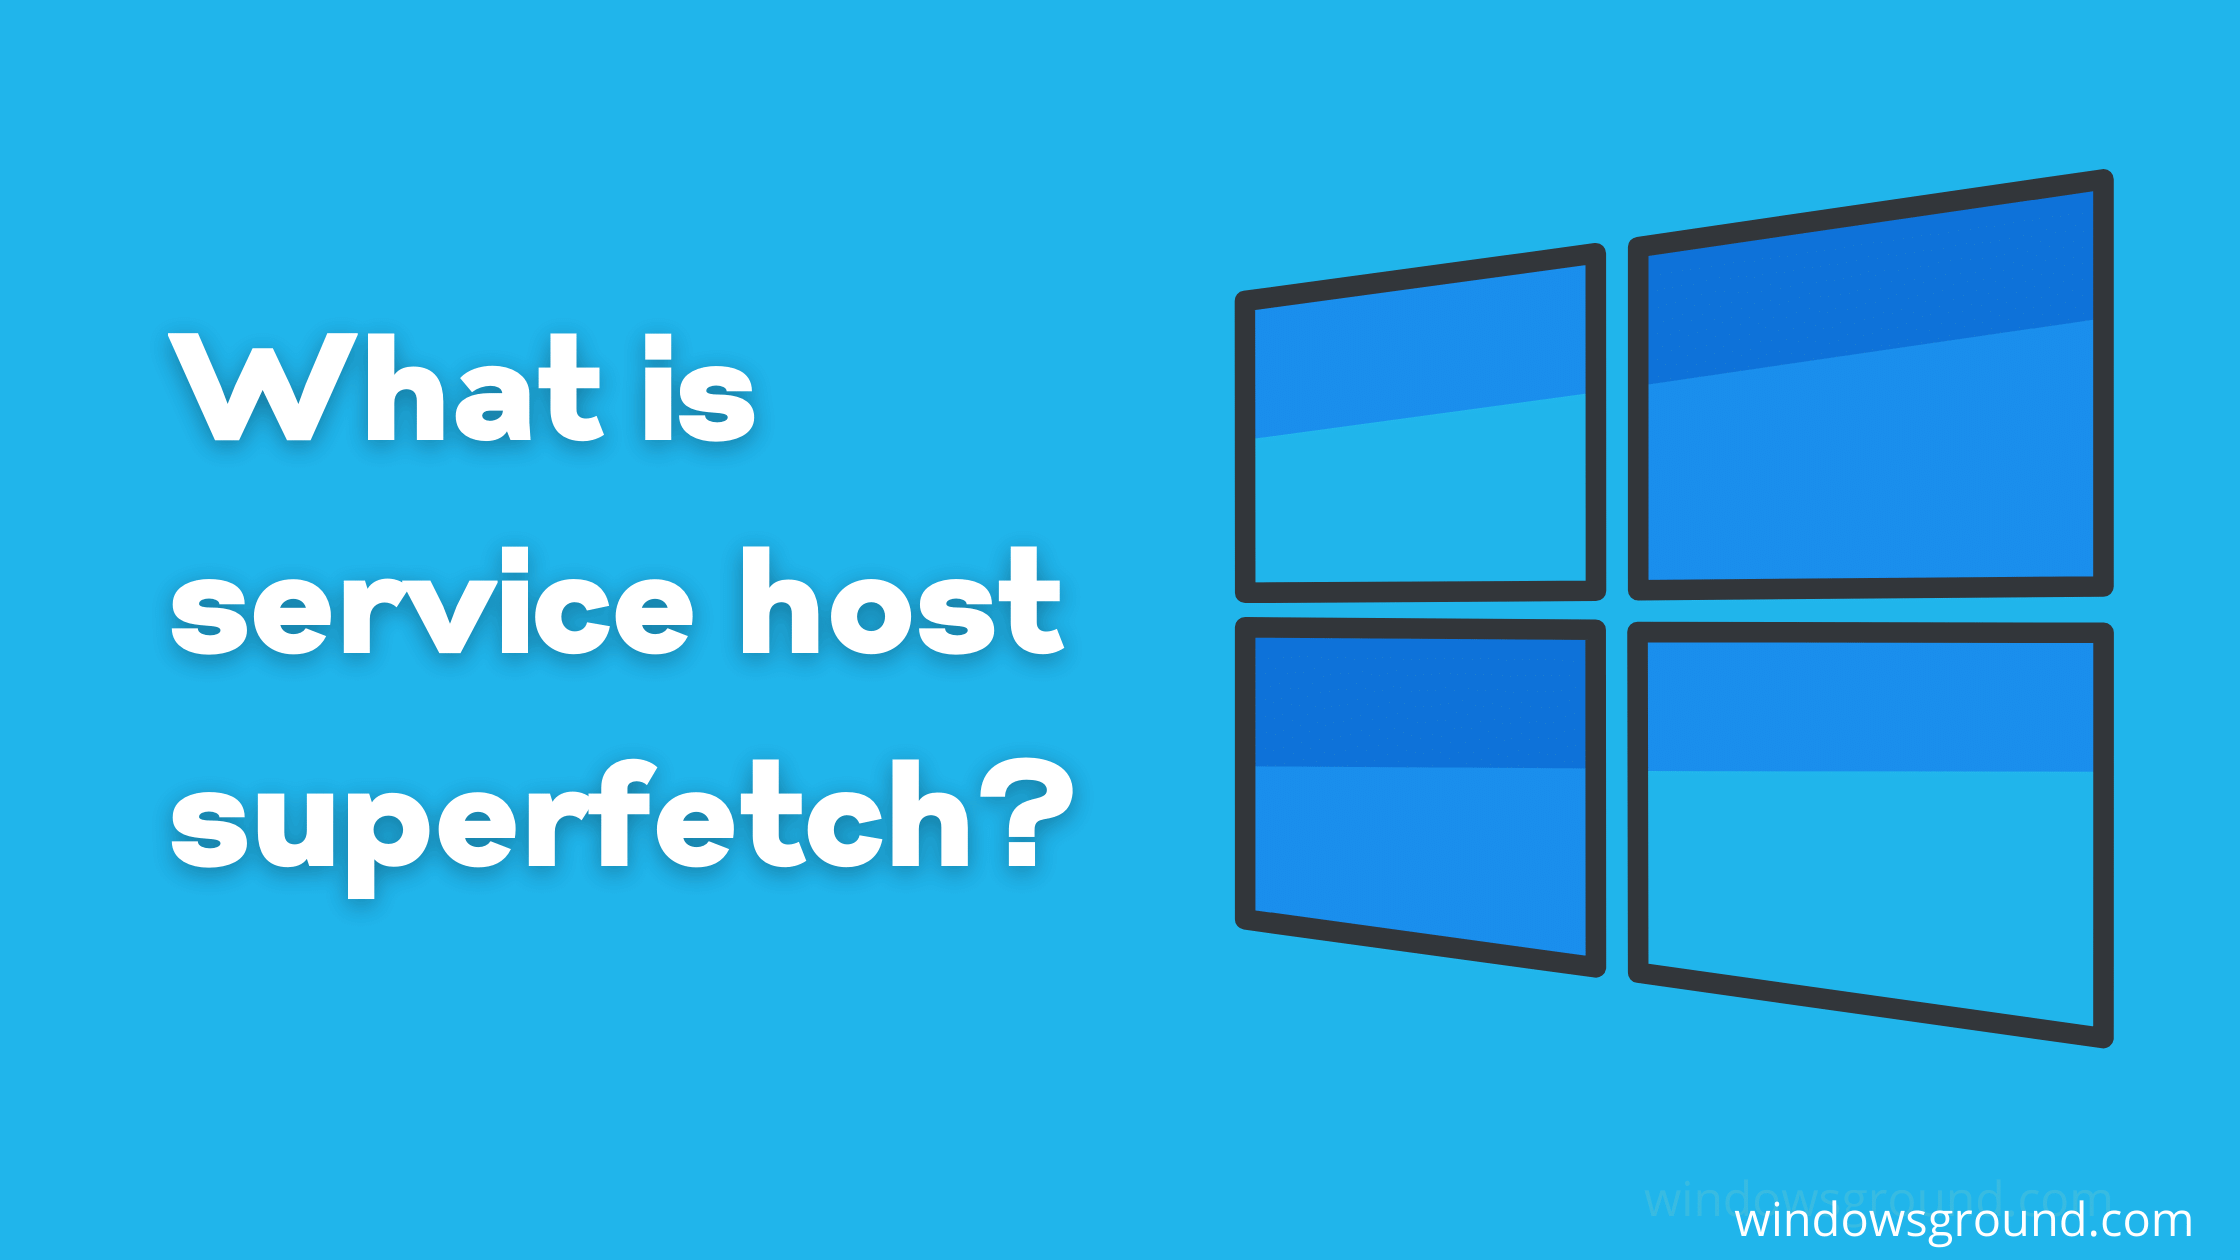 What is service host superfetch IN WINDOWS 10